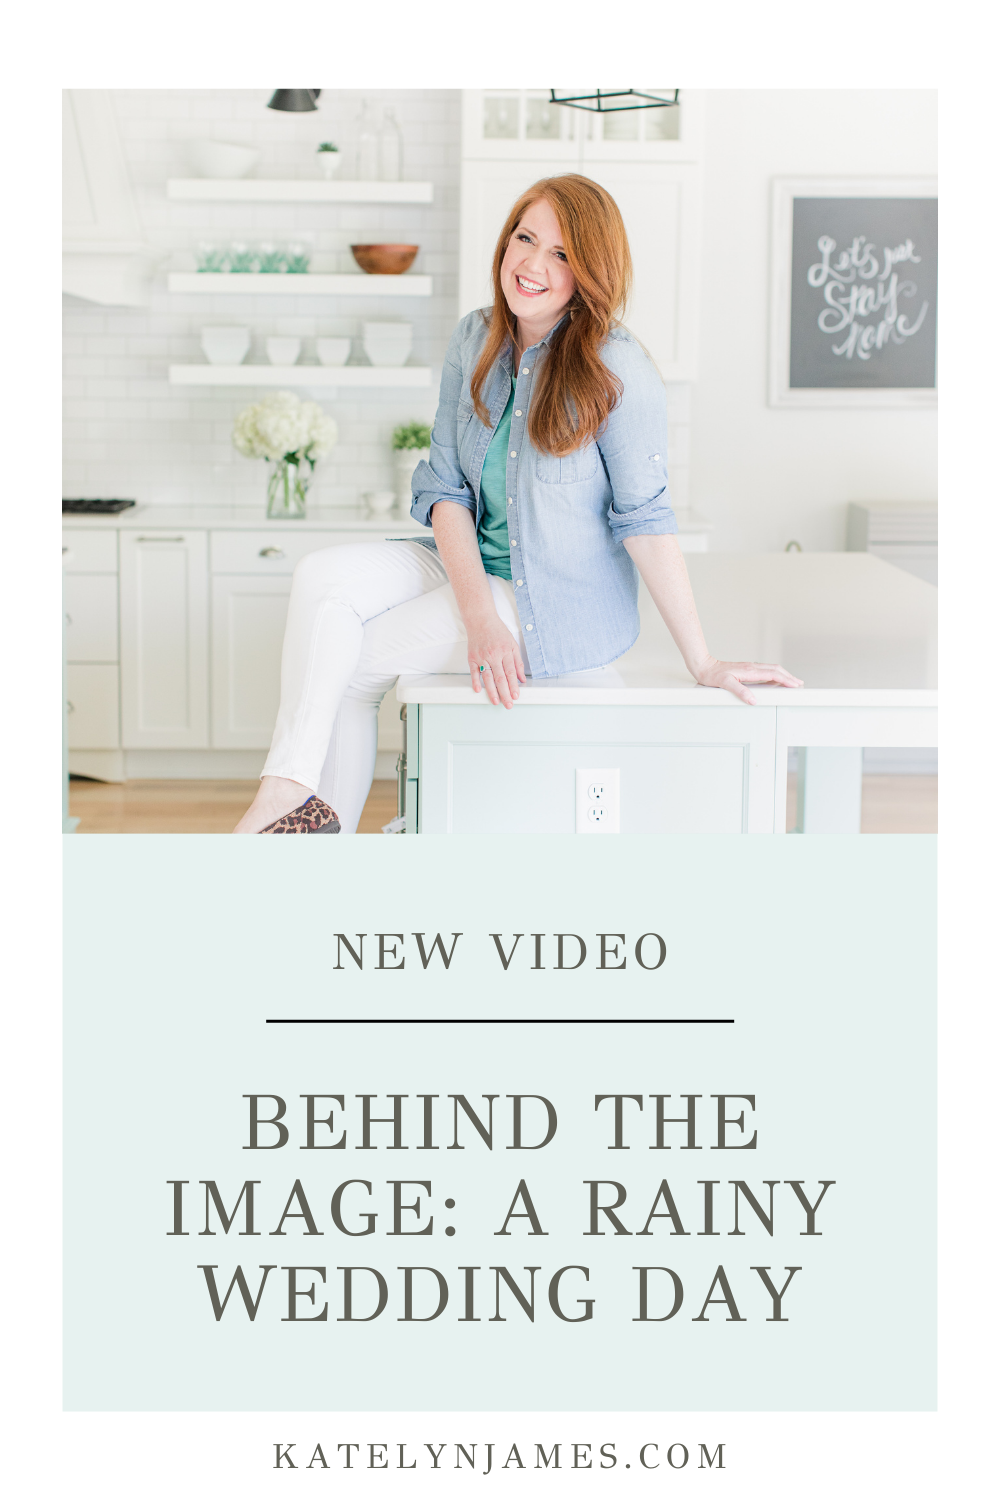 Behind the Image: A Rainy Wedding Day